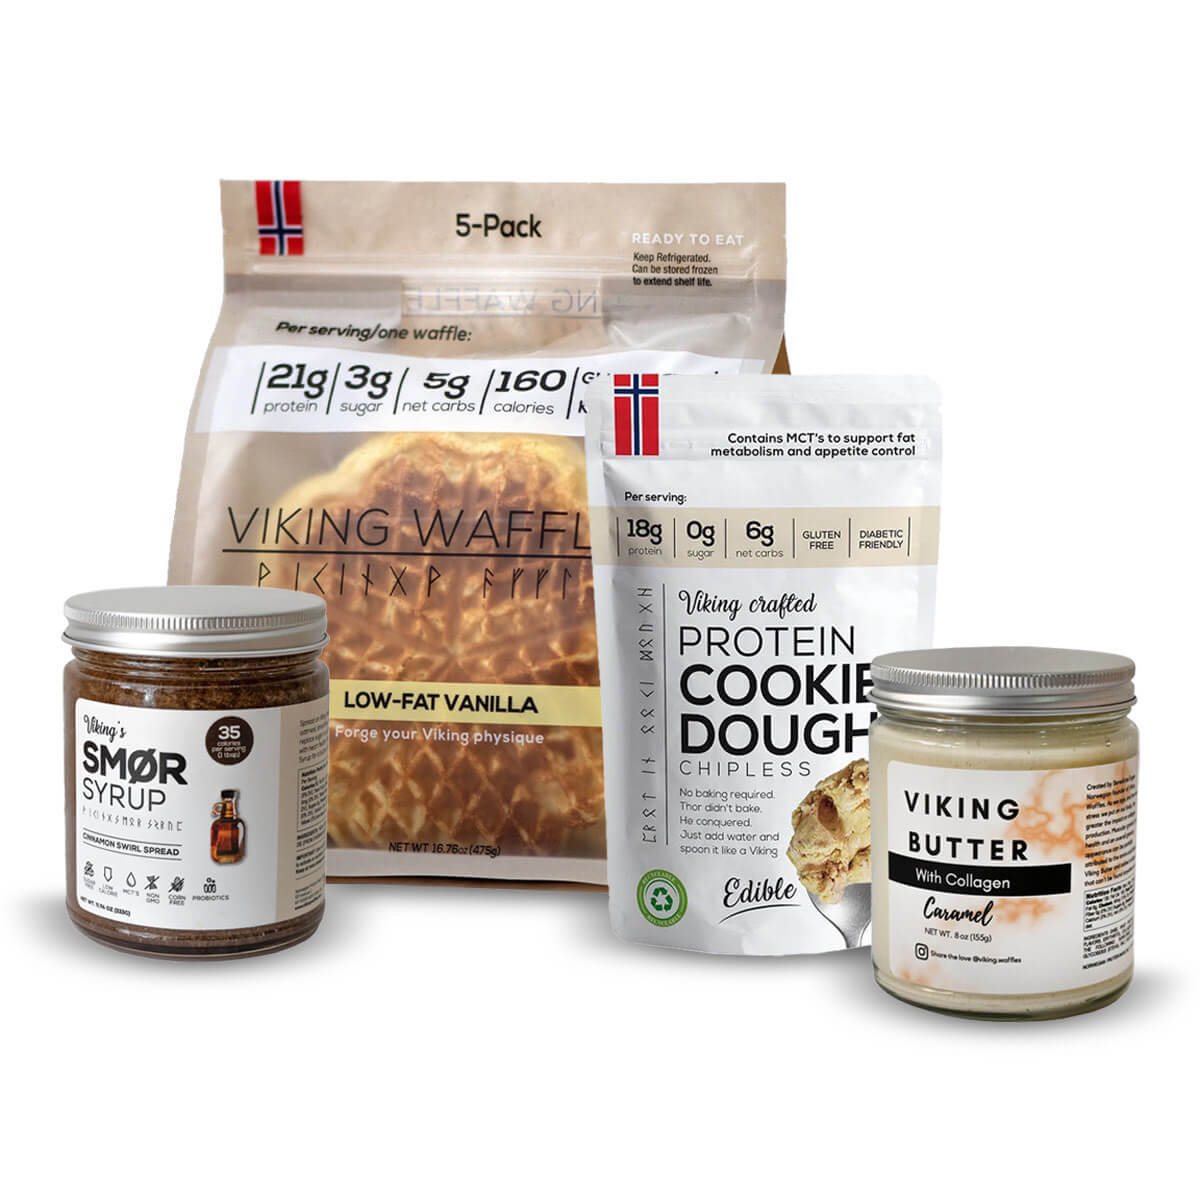 A product shot showing 4 Viking Waffles products. From left to right: a jar of the Smør Syrup, a bag of the low-fat vanilla waffles, the protein cookie dough, and a jar of the caramel Viking Butter with collagen. All the products have brand labels and clearly highlight nutrition information such as protein, sugar, carbs, and calories in bold. 